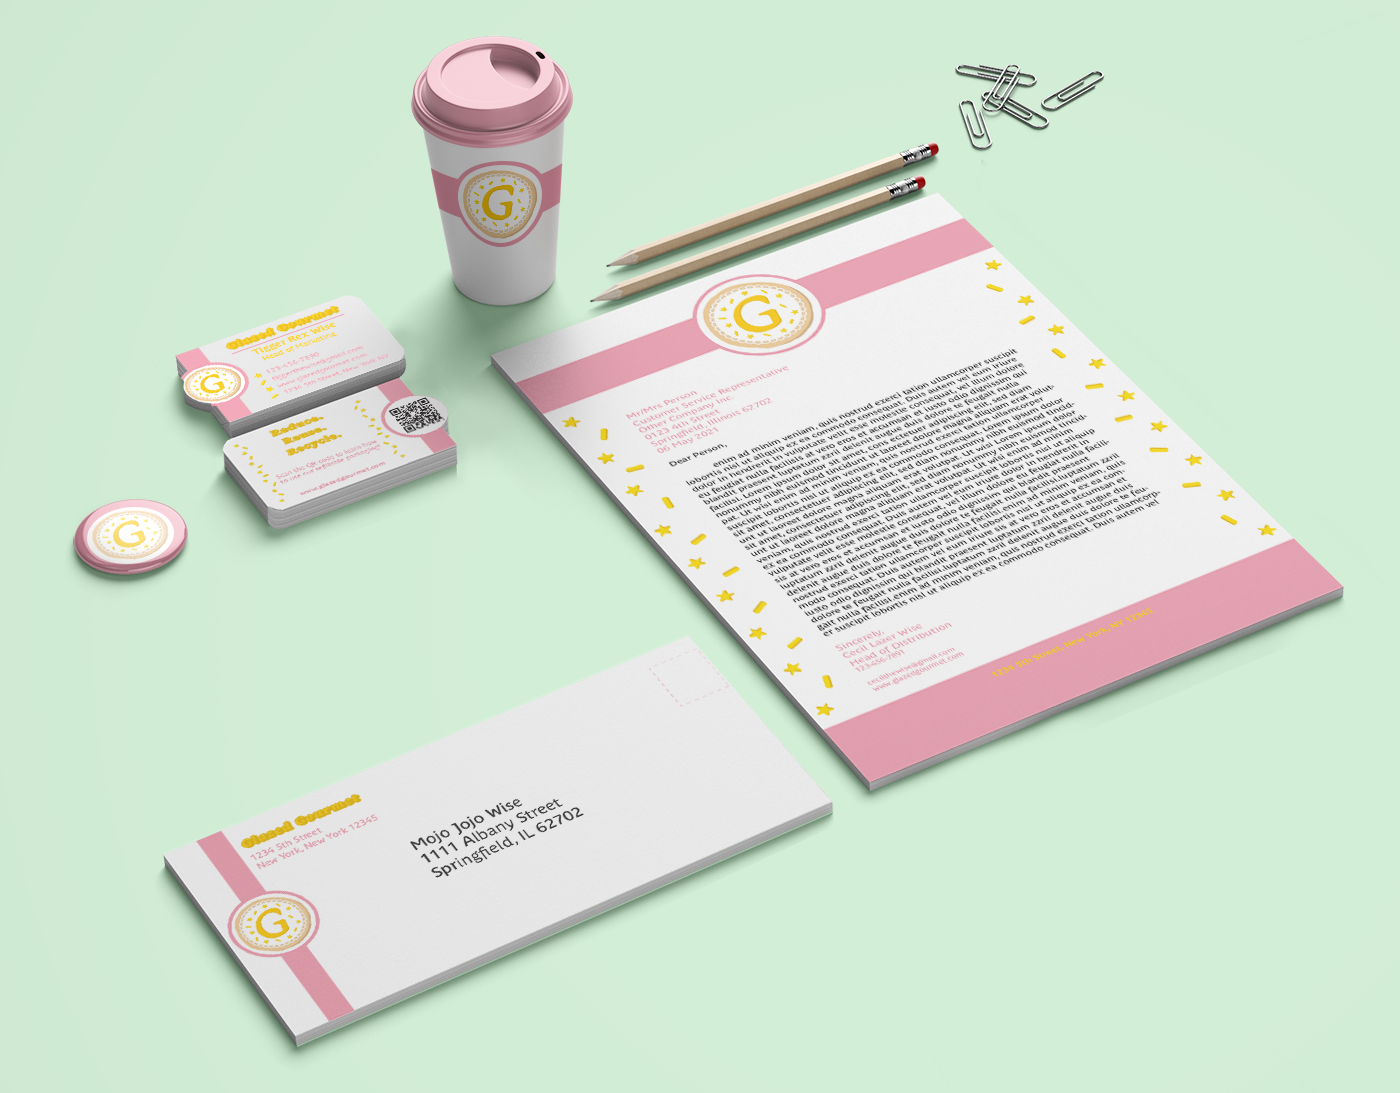 Stationary mockup showing letterhead, envelope, business cards, buttons, and a coffee cup for Glazed Gourmet cookie company.